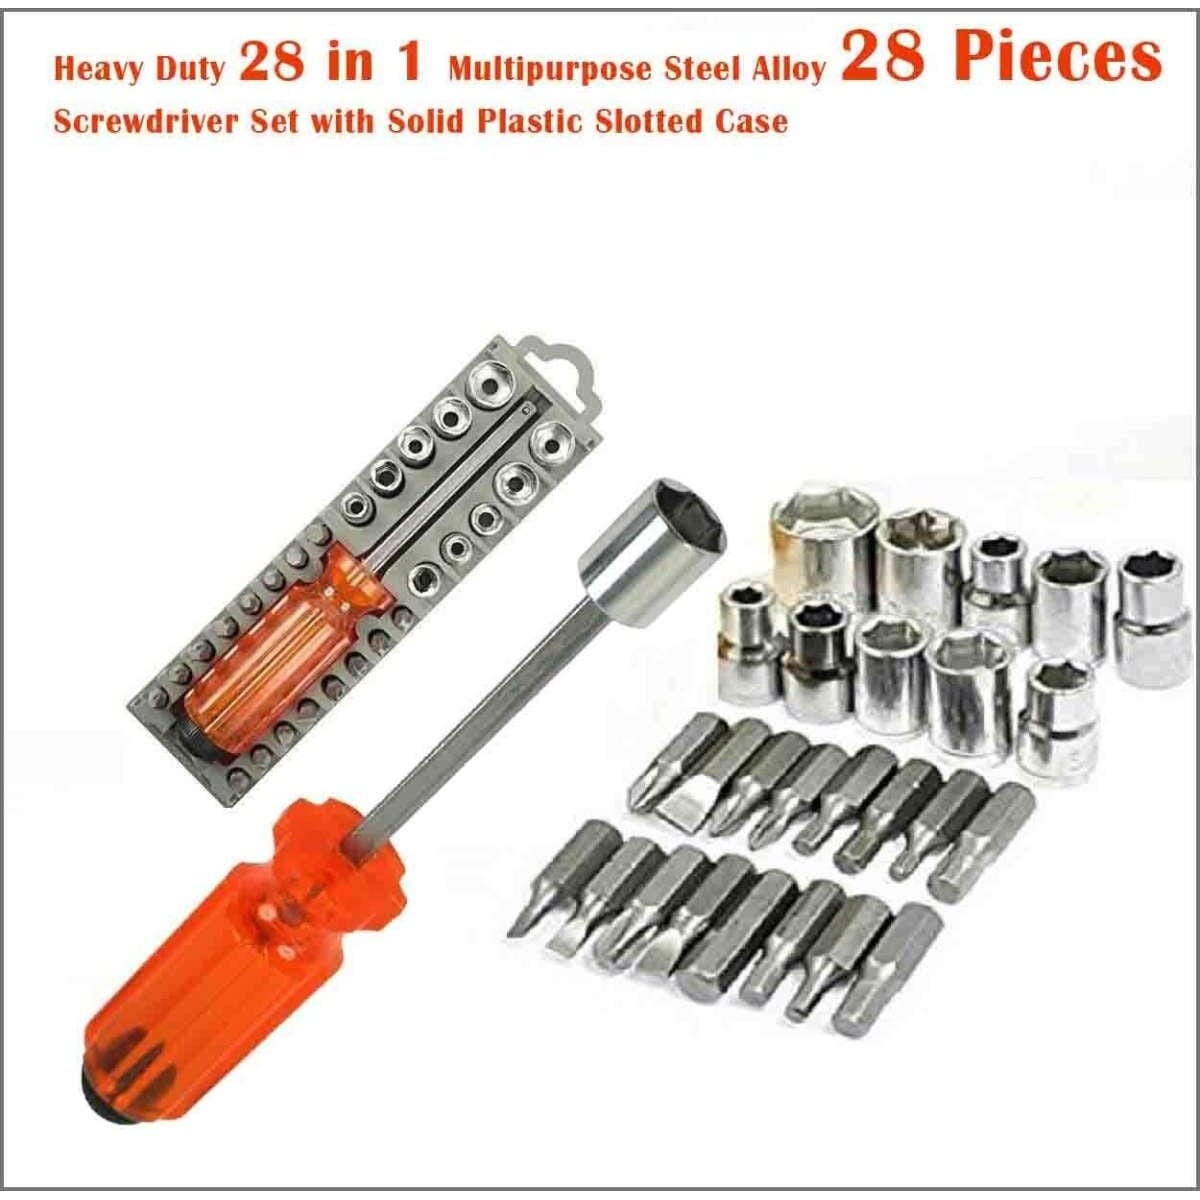 Heavy Duty 28 in 1 Multipurpose Steel Alloy 28 Pieces Screwdriver Set with Solid Plastic Slotted Case